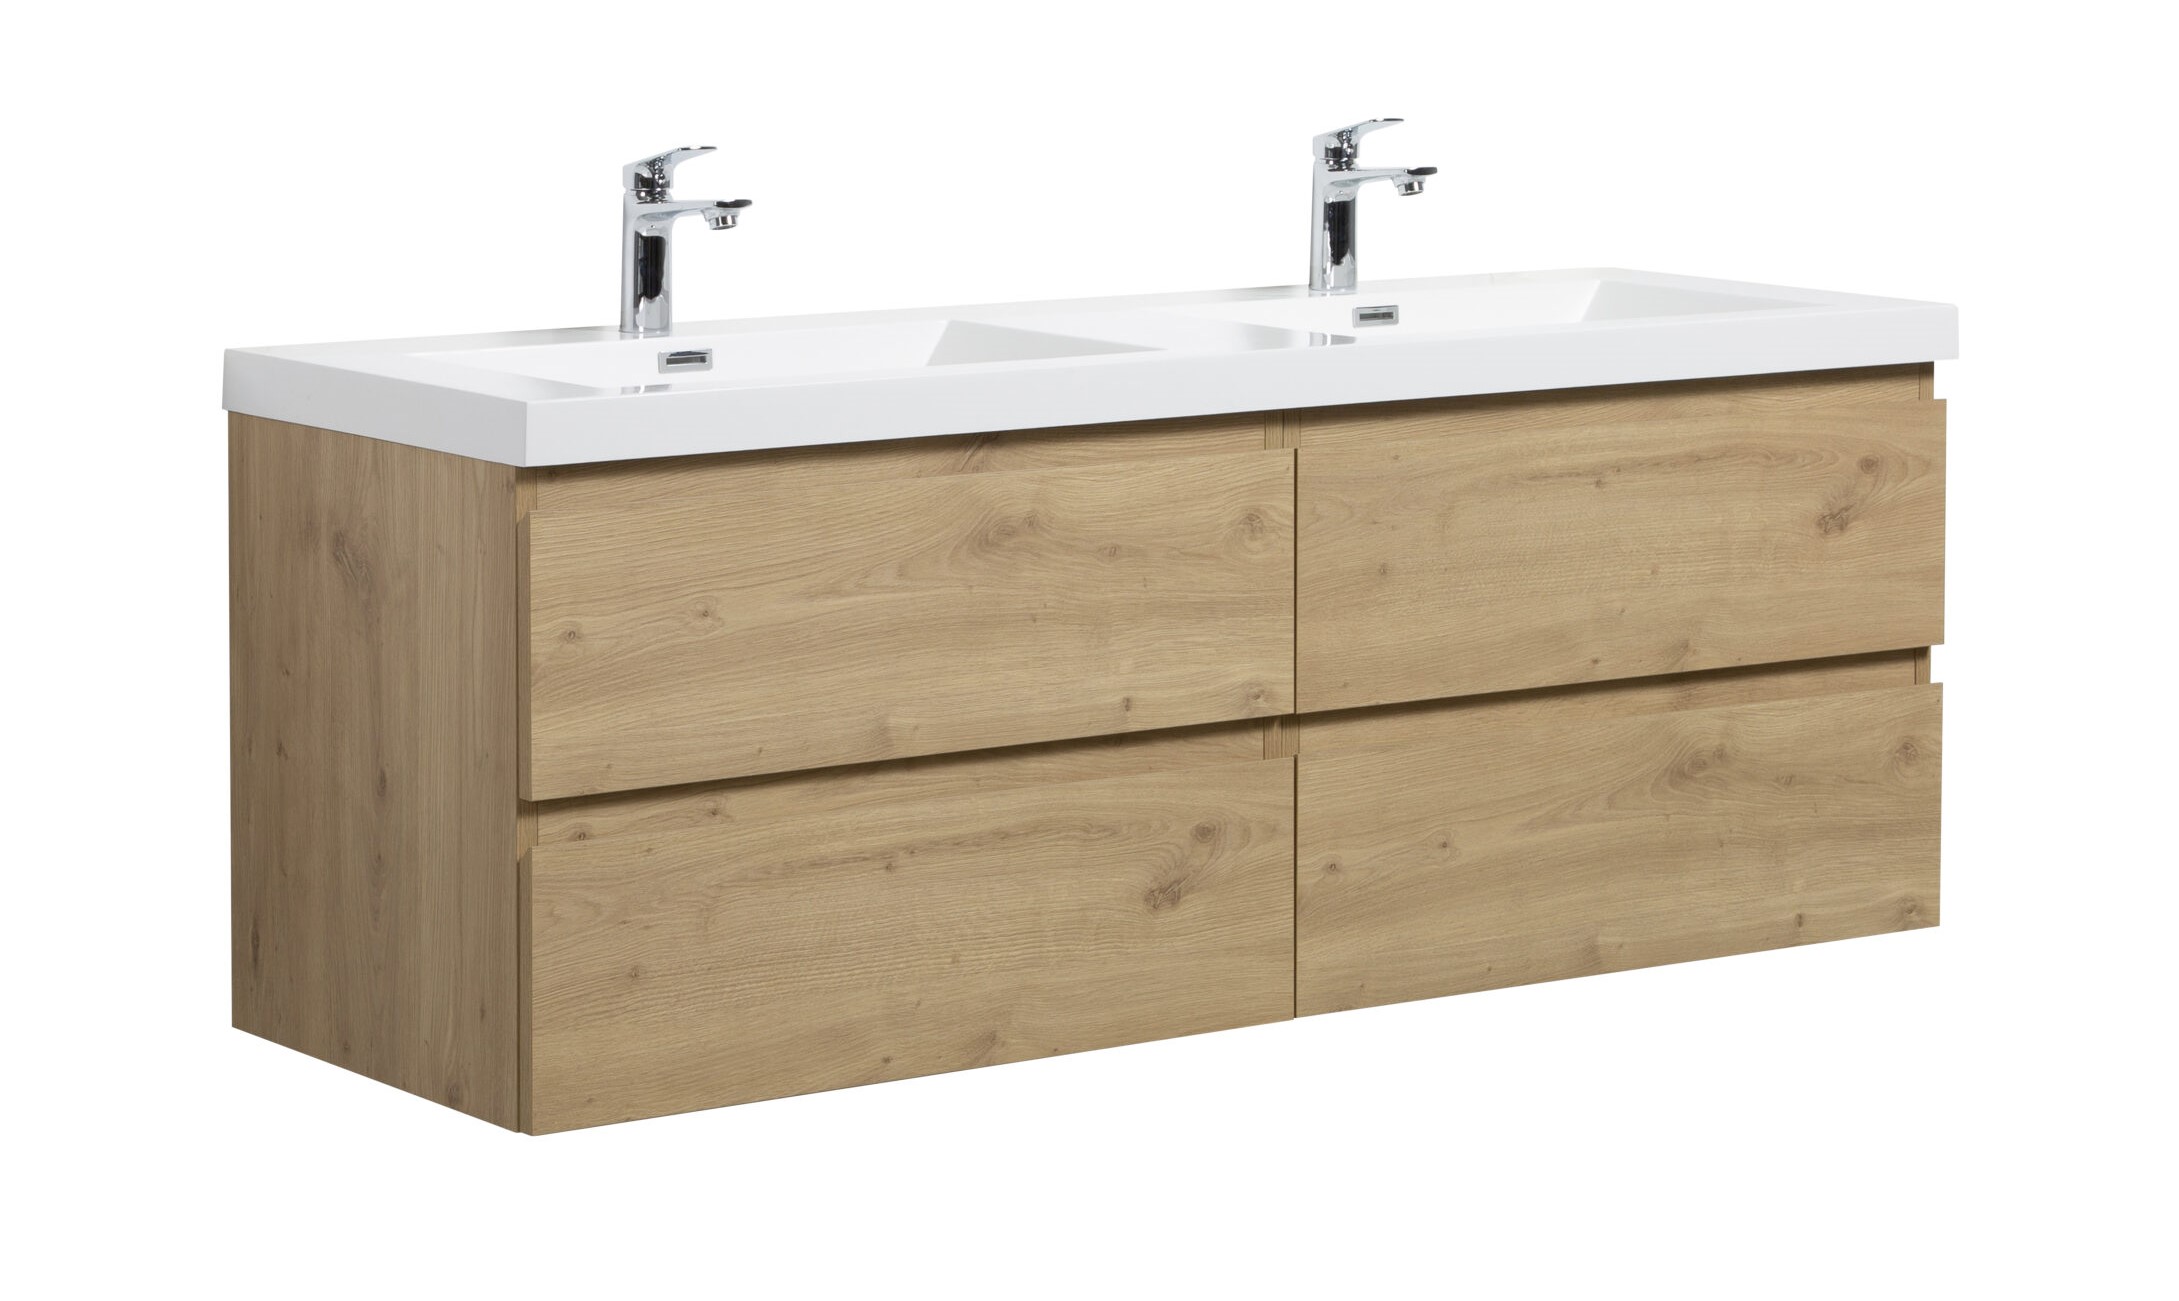 Aurora 60" Sonoma Oak Wall Hung Double Sink Bathroom Vanity with White Acrylic Countertop